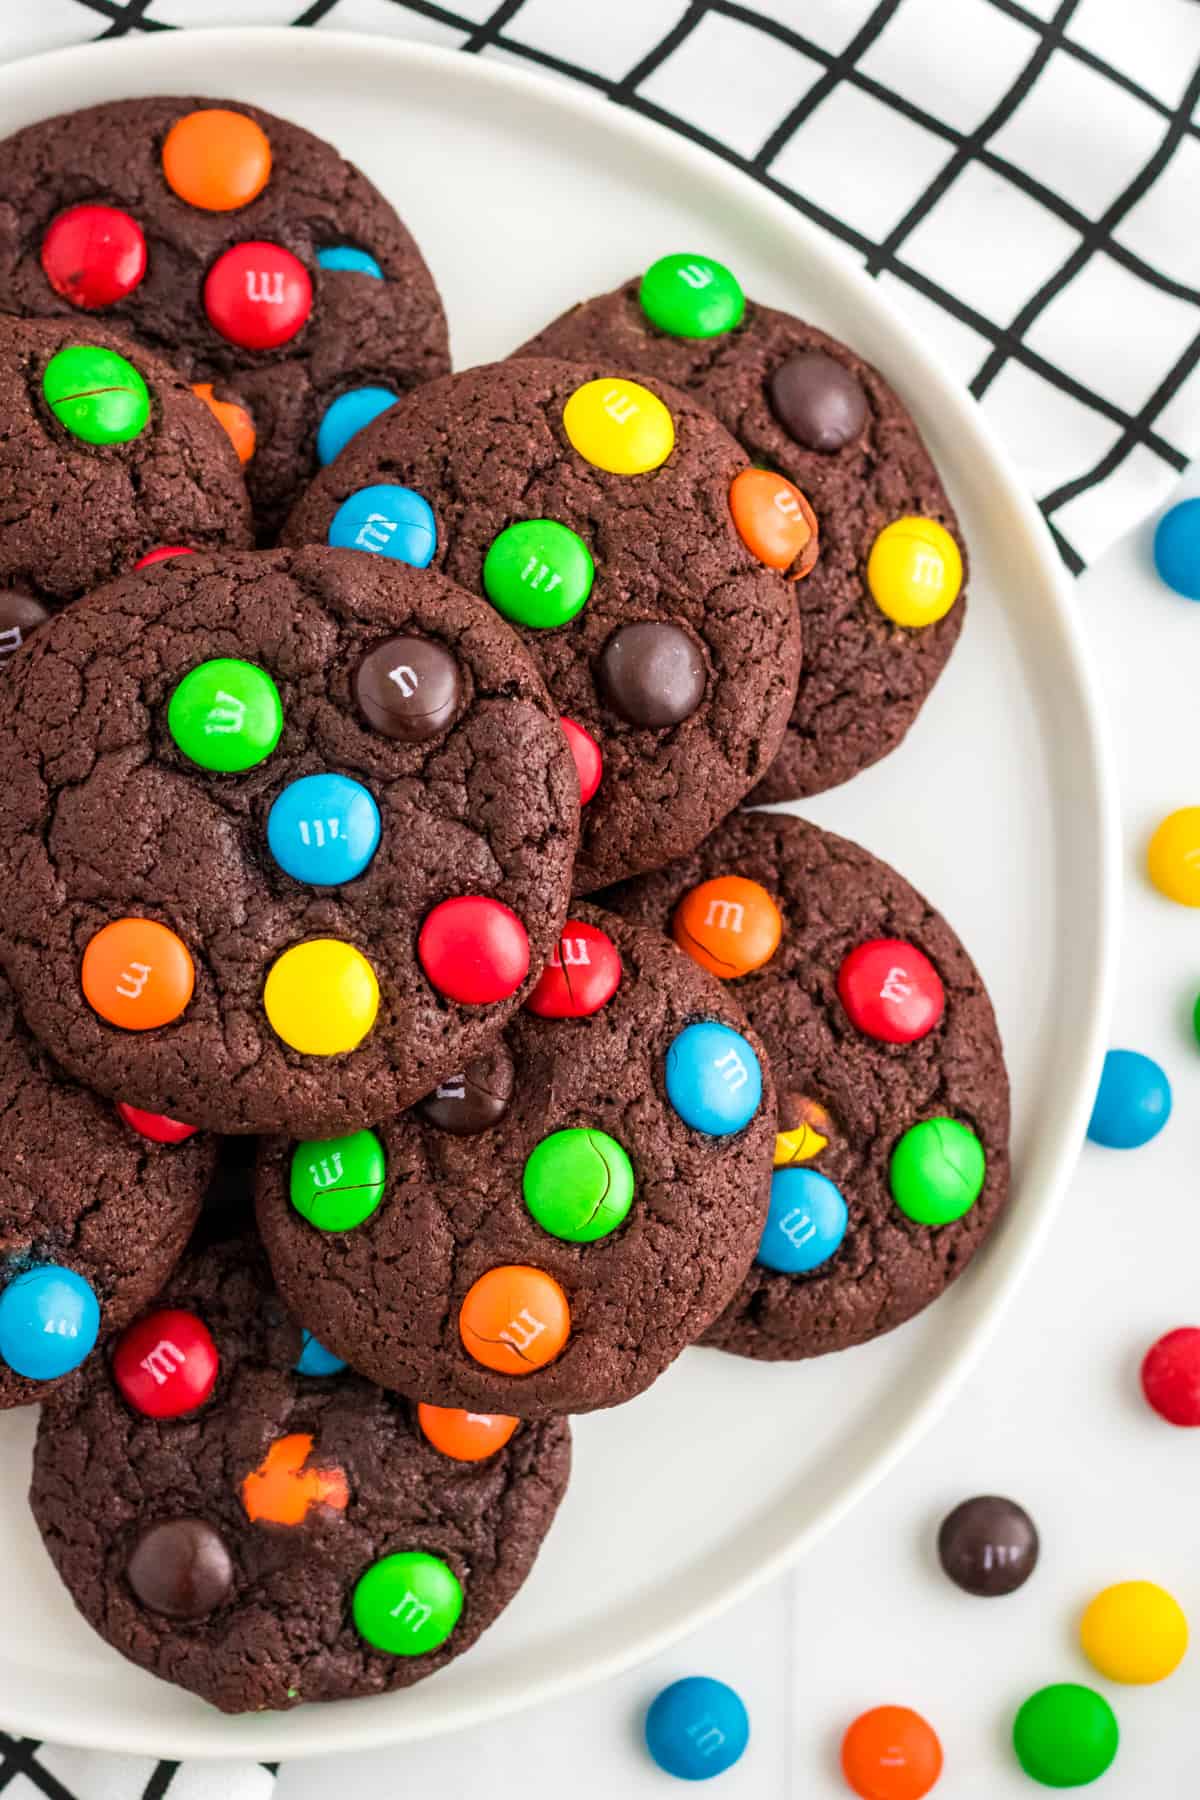 Chocolate cake mix cookies with M&Ms in them.